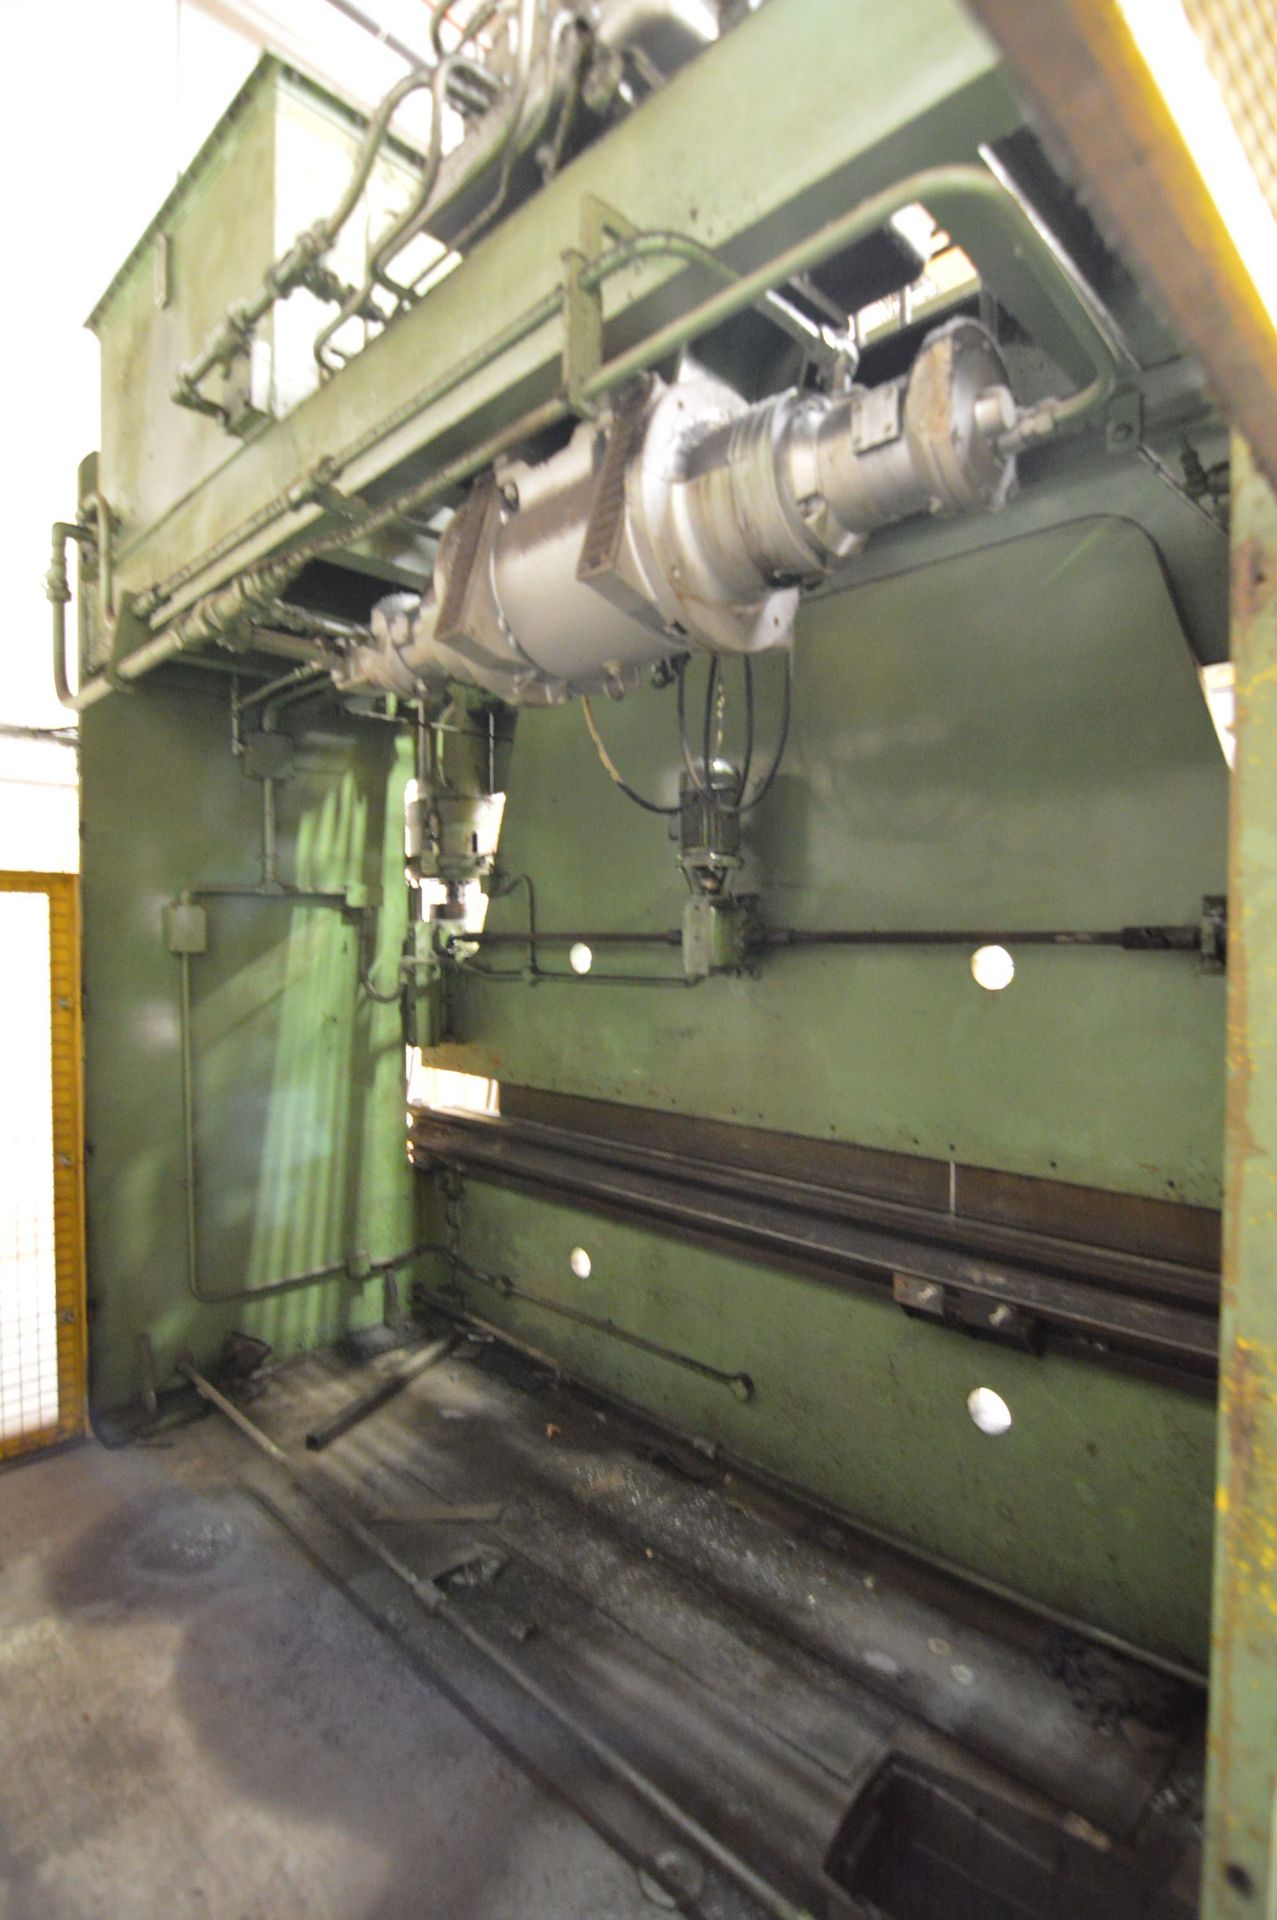 Bronx 200.220.10.H 160 tonne HYDRAULIC PRESS BRAKE, serial no. 30675, 12ft wide, with Sick infra-red - Image 5 of 8